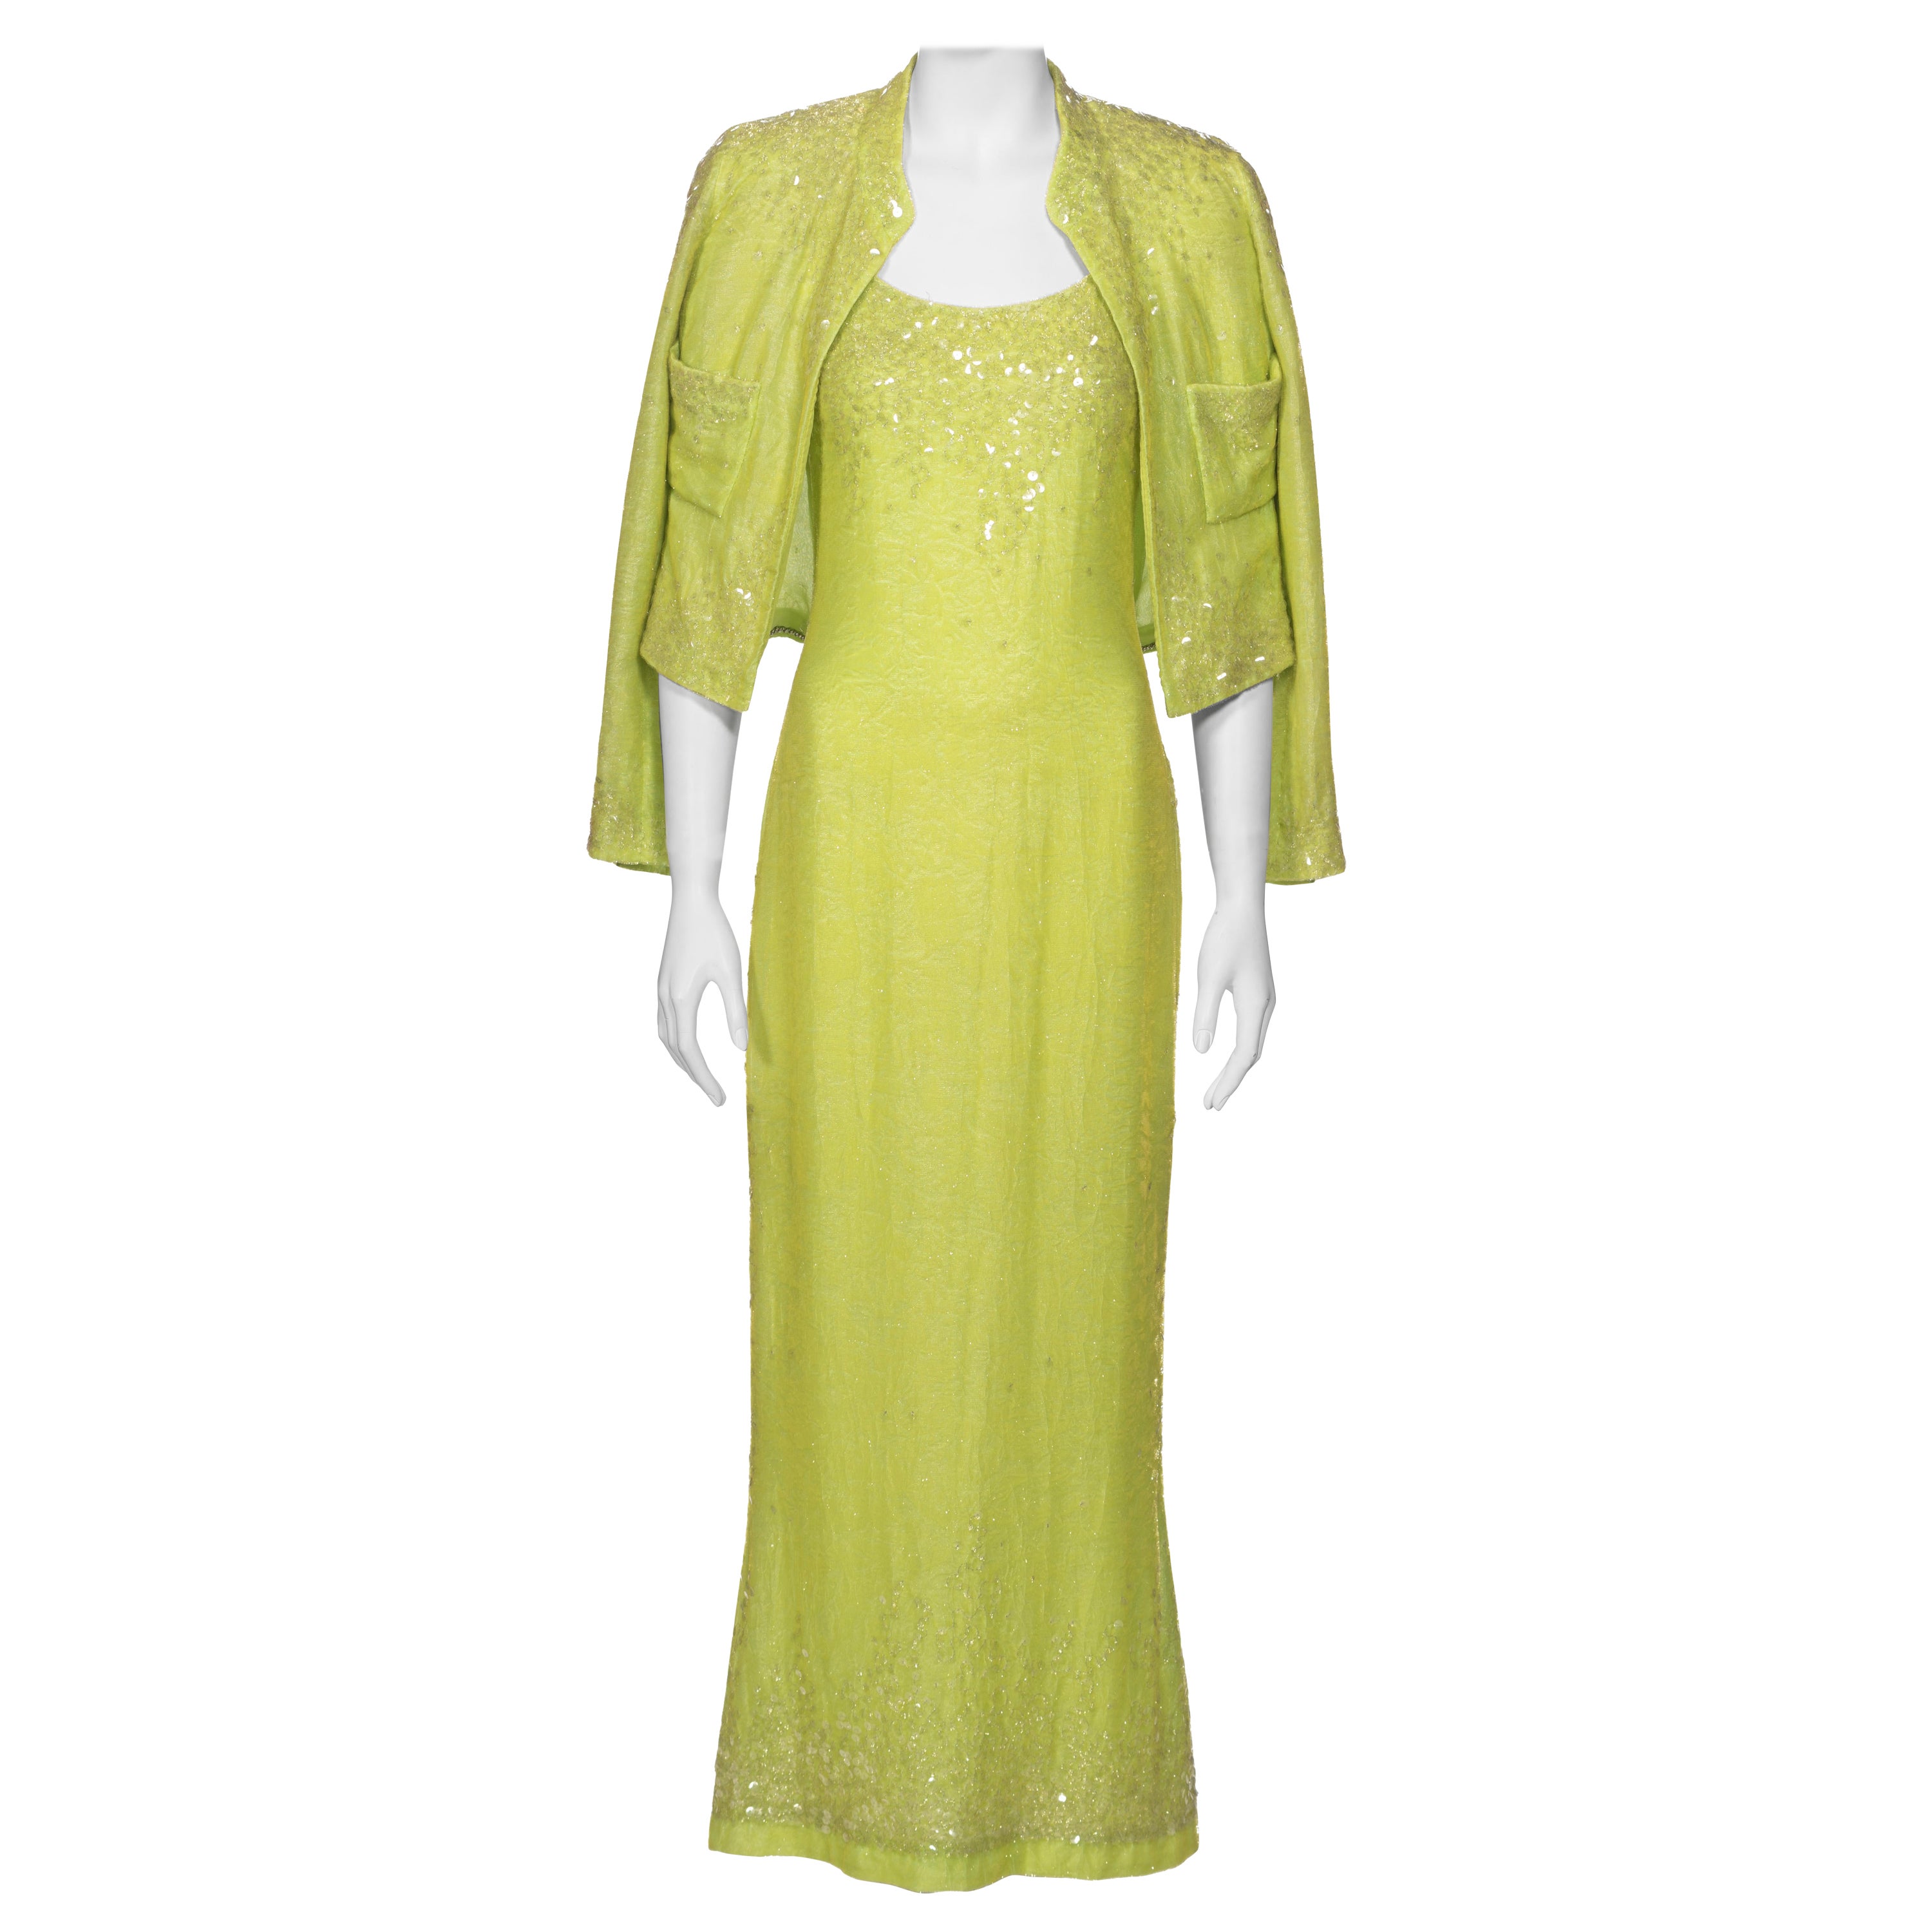 Chanel by Karl Lagerfeld Embellished Lime Green Velvet Dress and Jacket, ss 1997 For Sale